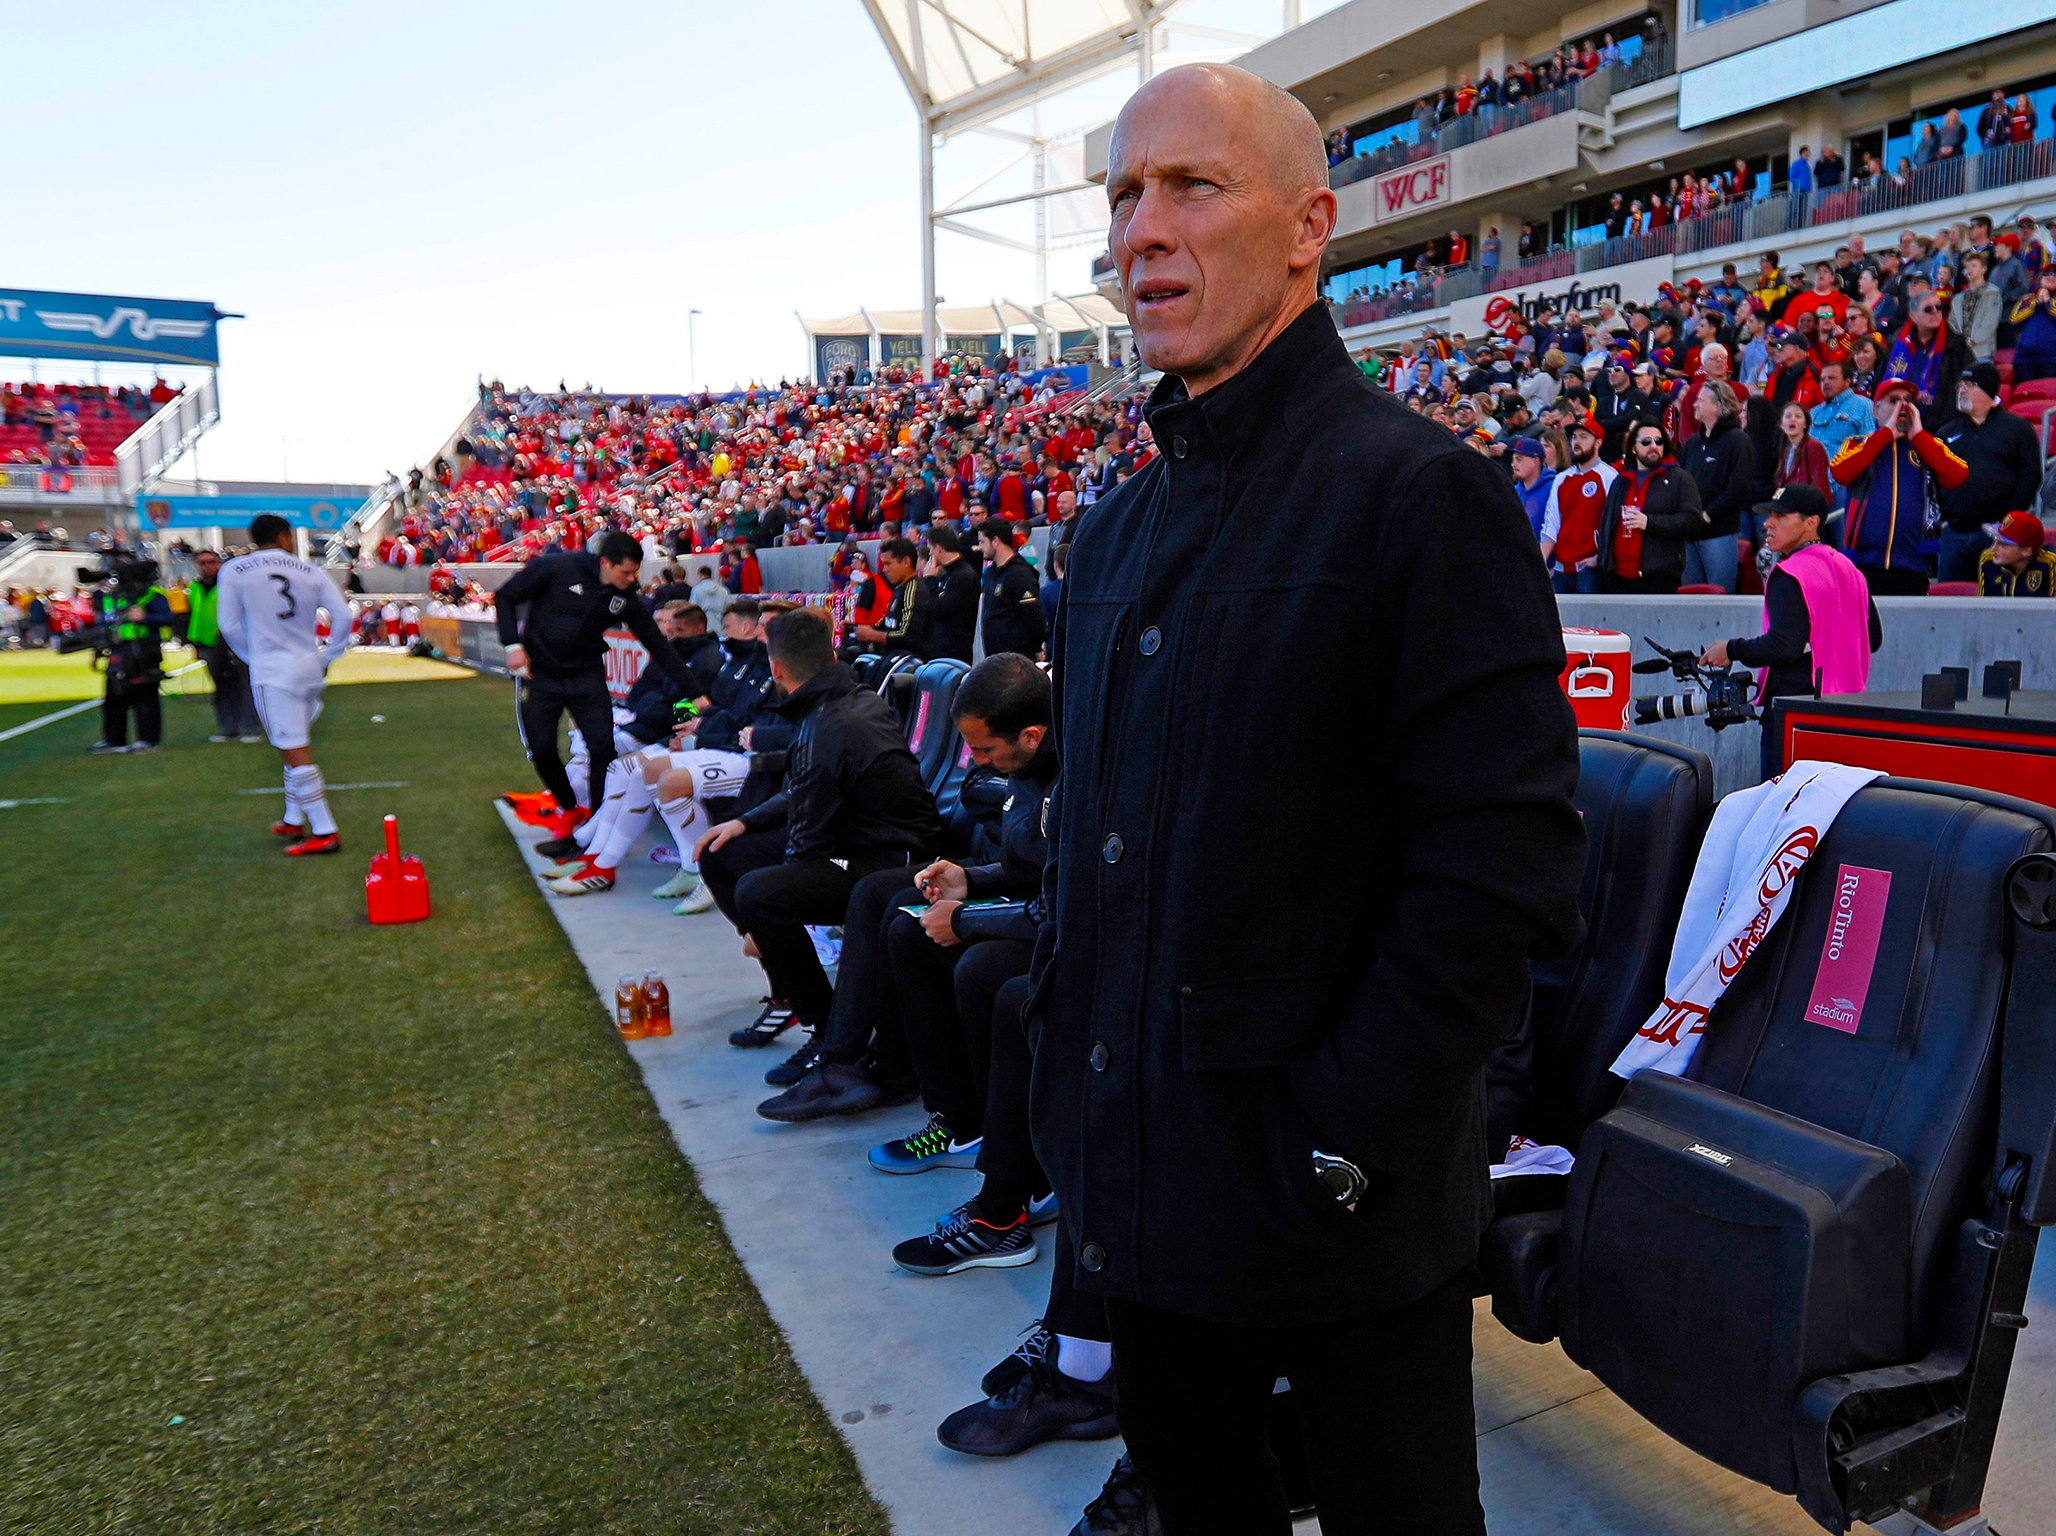 Bob Bradley interview: From Swansea to Los Angeles and learning along the way